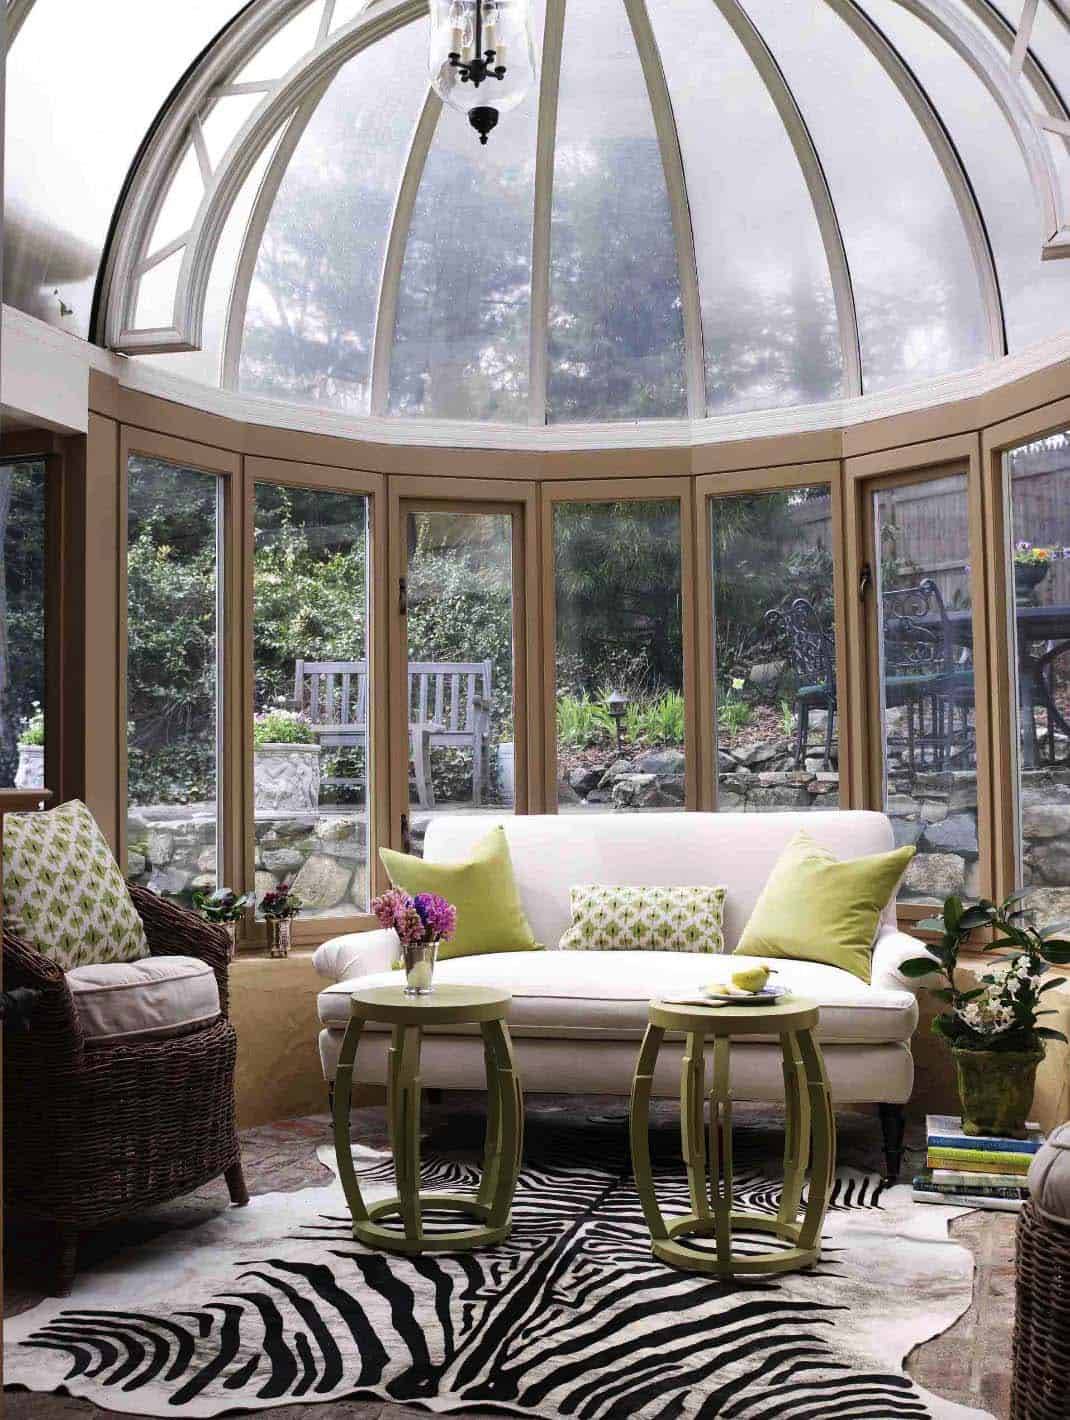 Your Conservatory